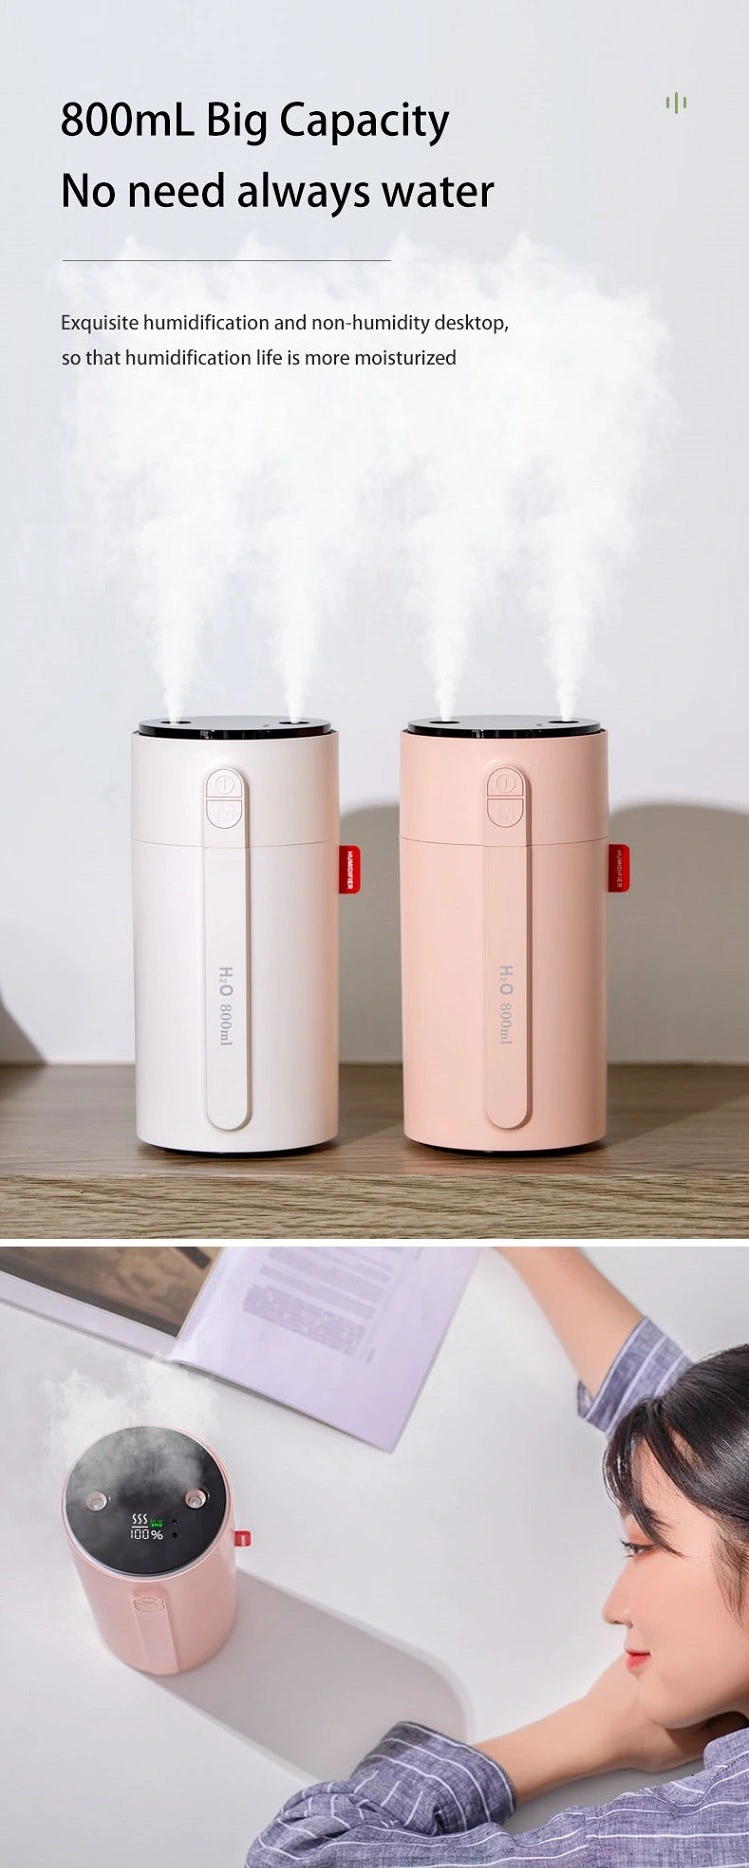 New Home Appliances Air Conditioning Appliances Portable Ultrasonic Humidifier Aromatherapy Air Humidifier